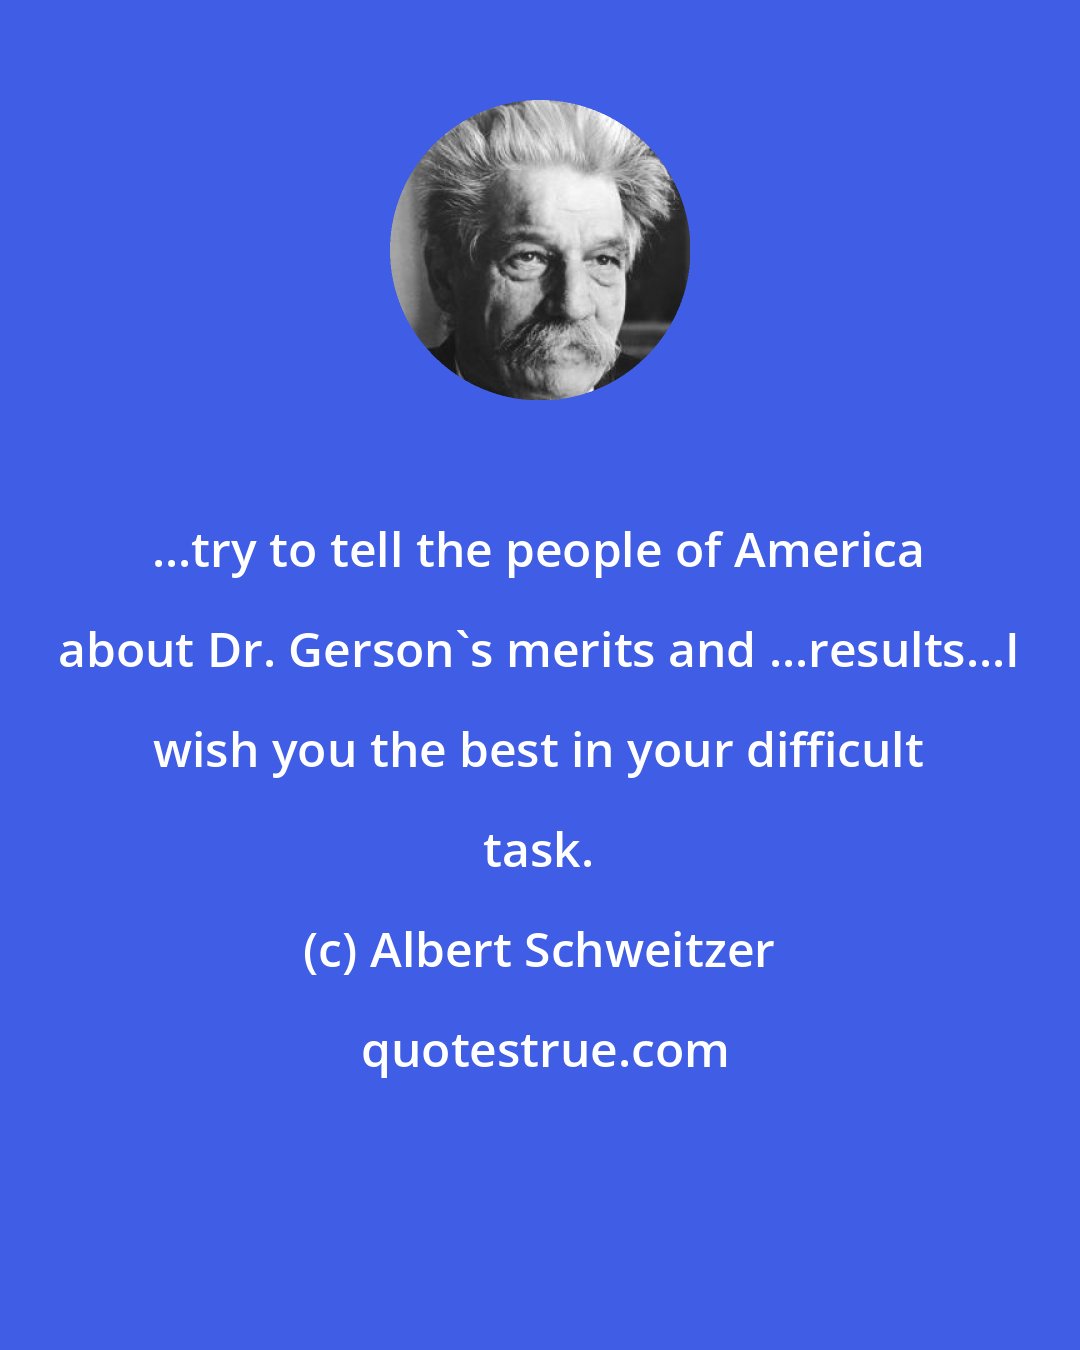 Albert Schweitzer: ...try to tell the people of America about Dr. Gerson's merits and ...results...I wish you the best in your difficult task.